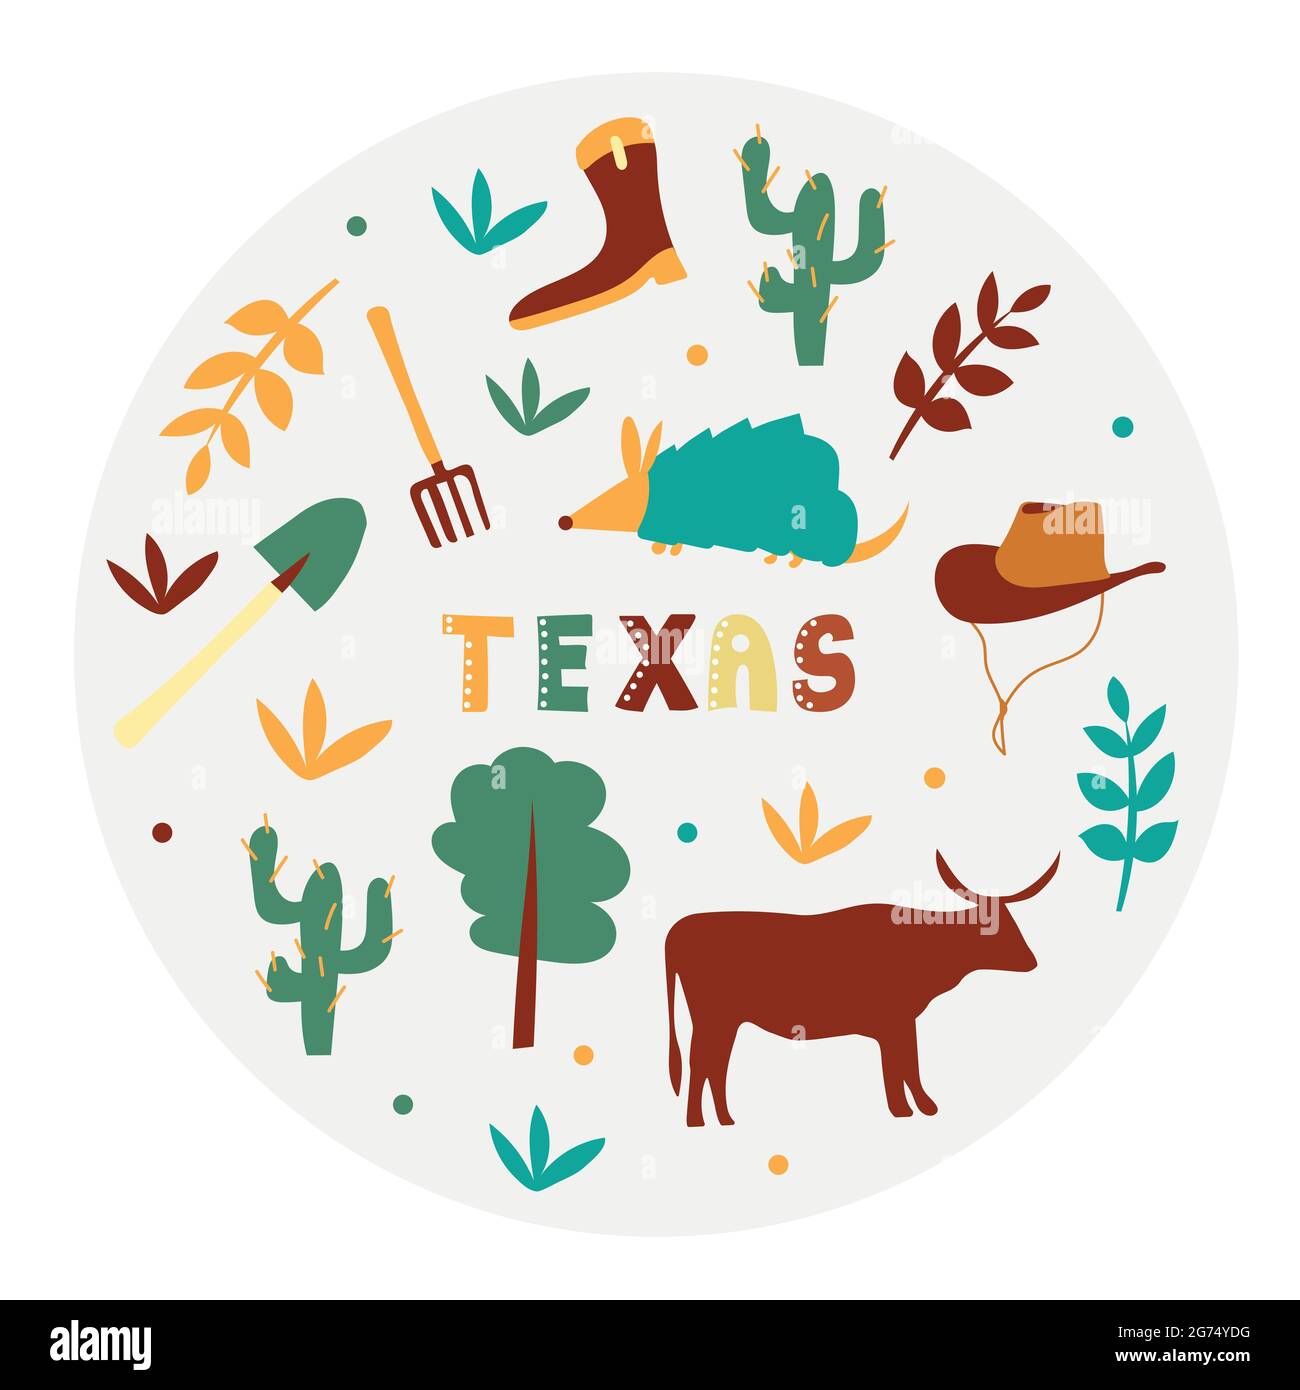 USA collection. Vector illustration of Texas. State Symbols - round shape Stock Vector